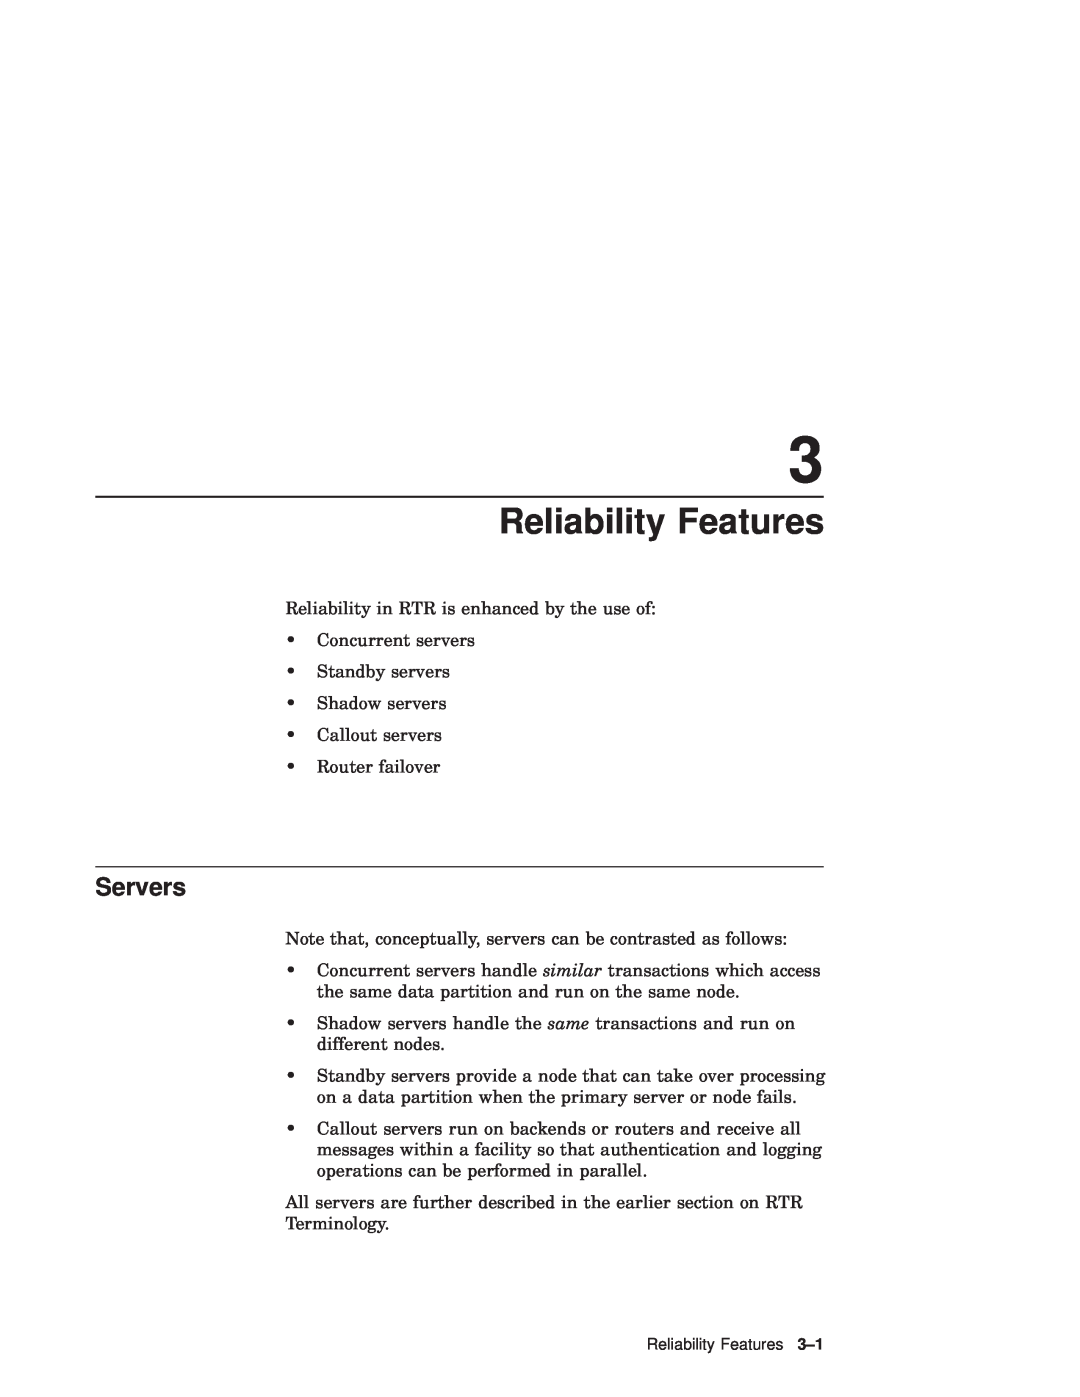 Compaq Reliable Transaction Router manual Reliability Features, Servers 